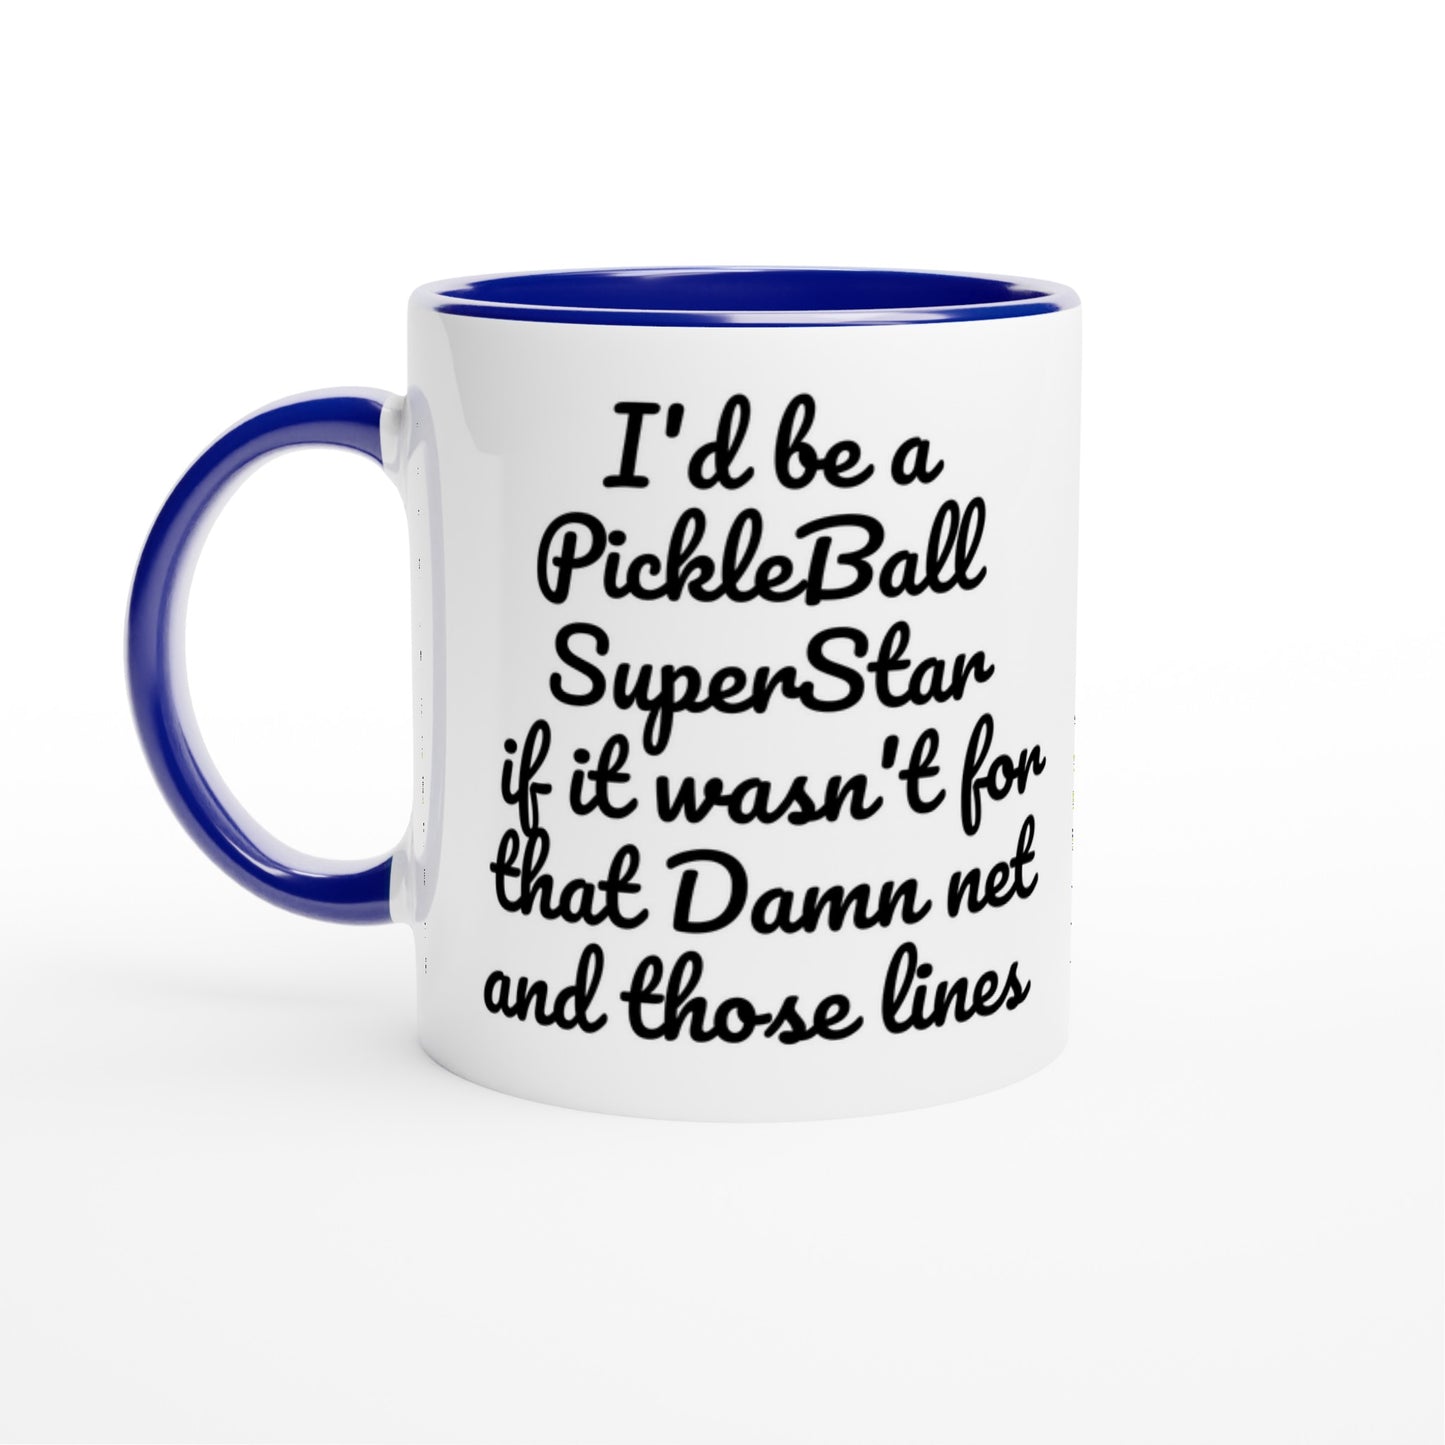 I'd be a PickleBall SuperStar if it wasn't for that Damn net and those lines on front  and Let's Play PickleBall logo on back Pickleball 11oz white ceramic mug with blue handle, rim and inside coffee mug it's dishwasher safe and microwave safe.